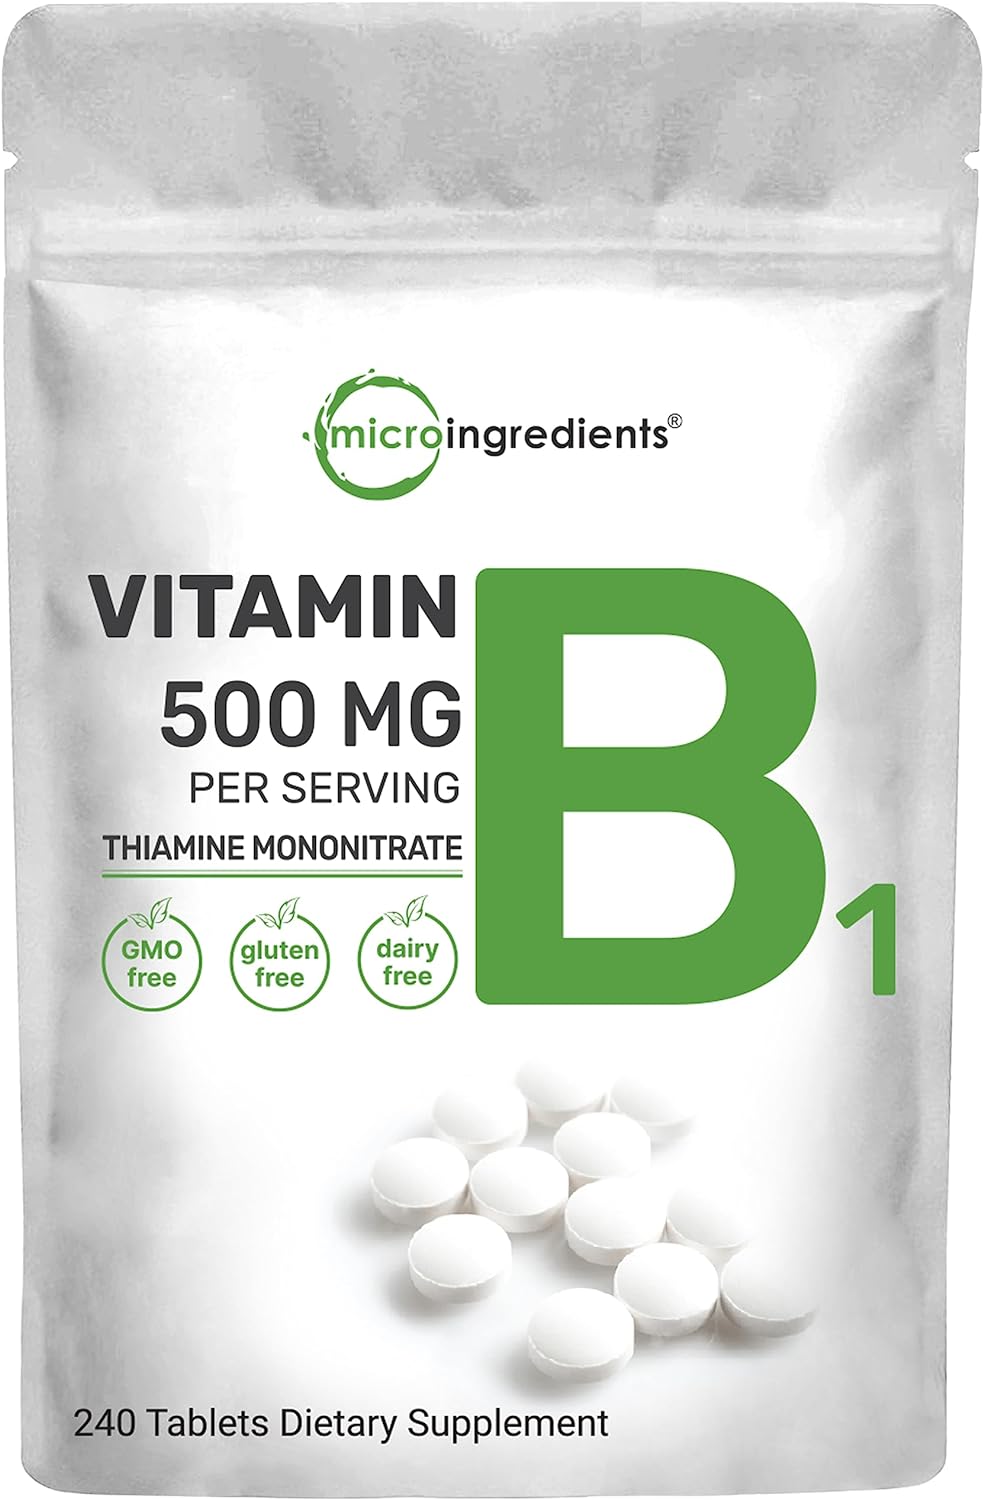 Micro Ingredients Vitamin B1 500mg Per Serving, 240 Tablets | Vitamin B1 Thiamine Supplement, Essential B Vitamins | Supports Metabolism  Healthy Nervous System | Non-GMO, Easy to Swallow